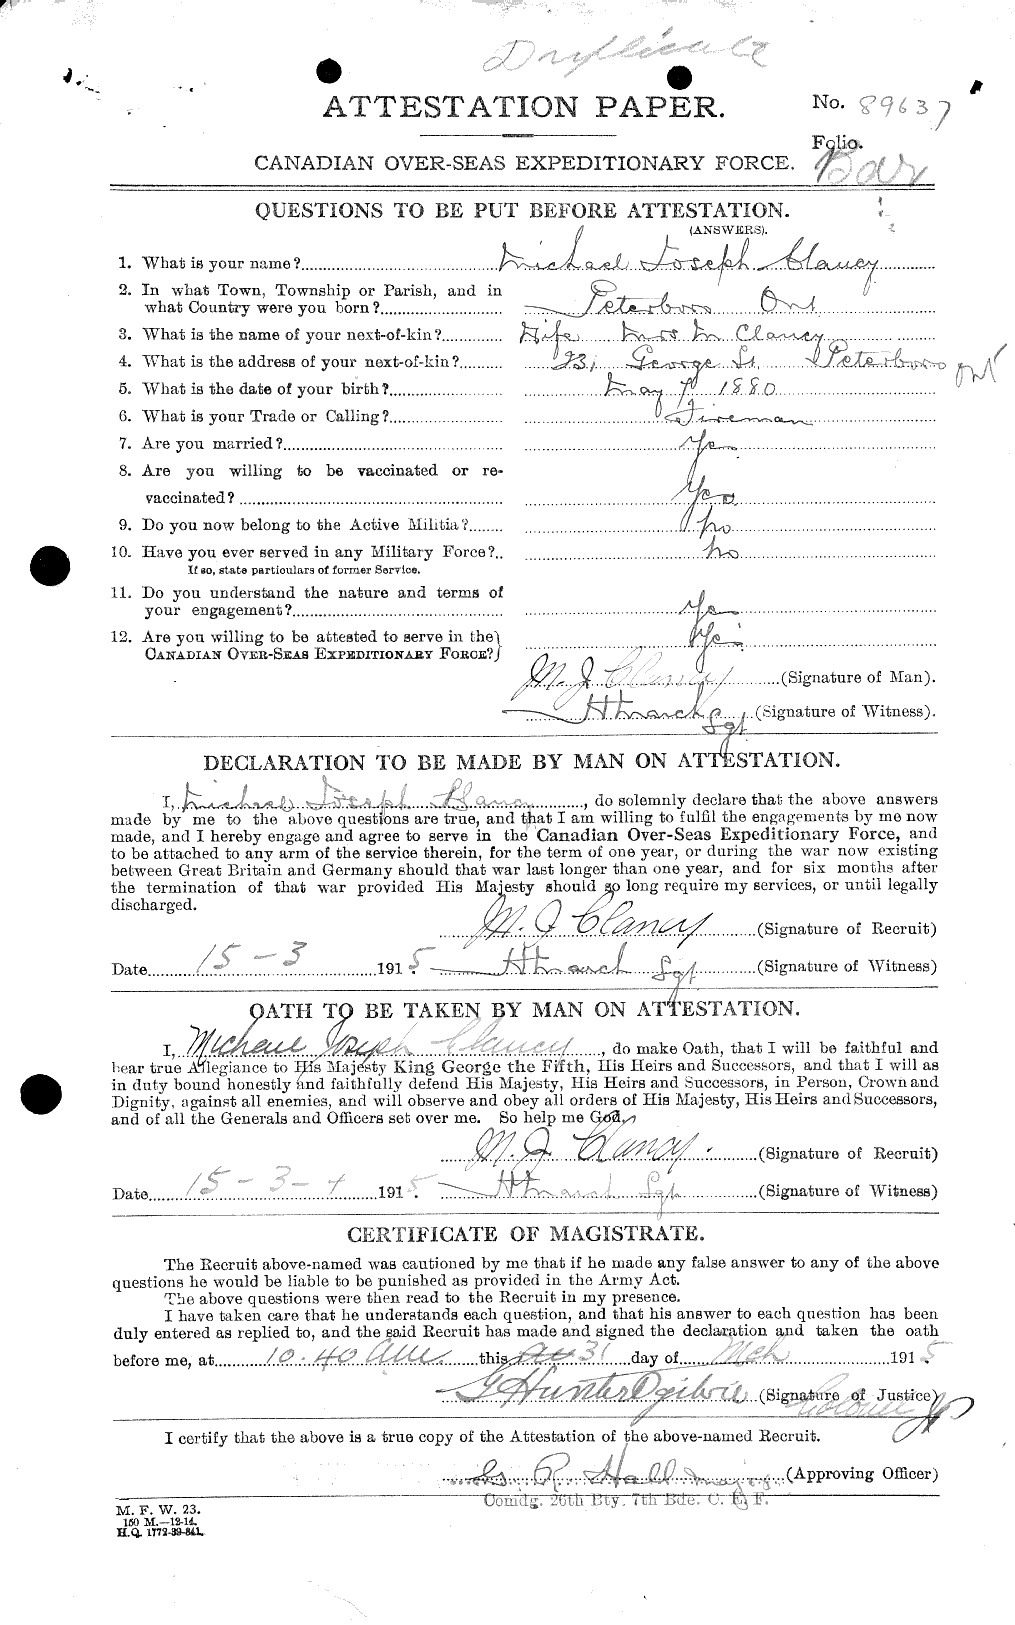 Personnel Records of the First World War - CEF 020578a